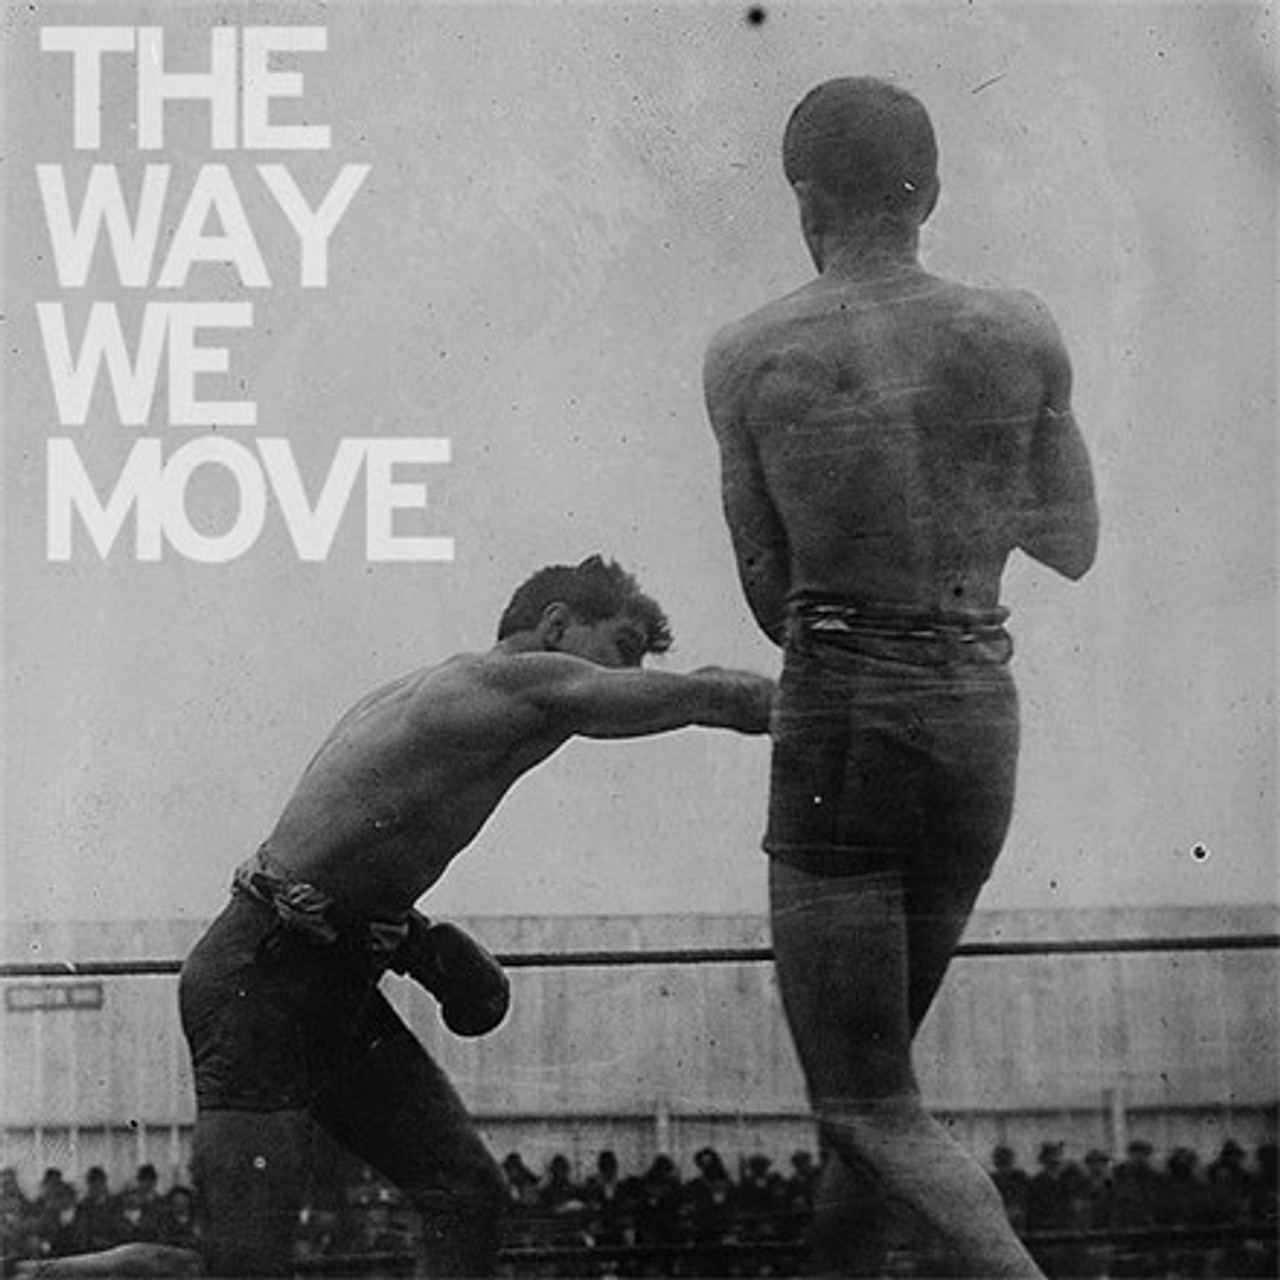 LANGHORNE SLIM & THE LAW THE WAY WE MOVE